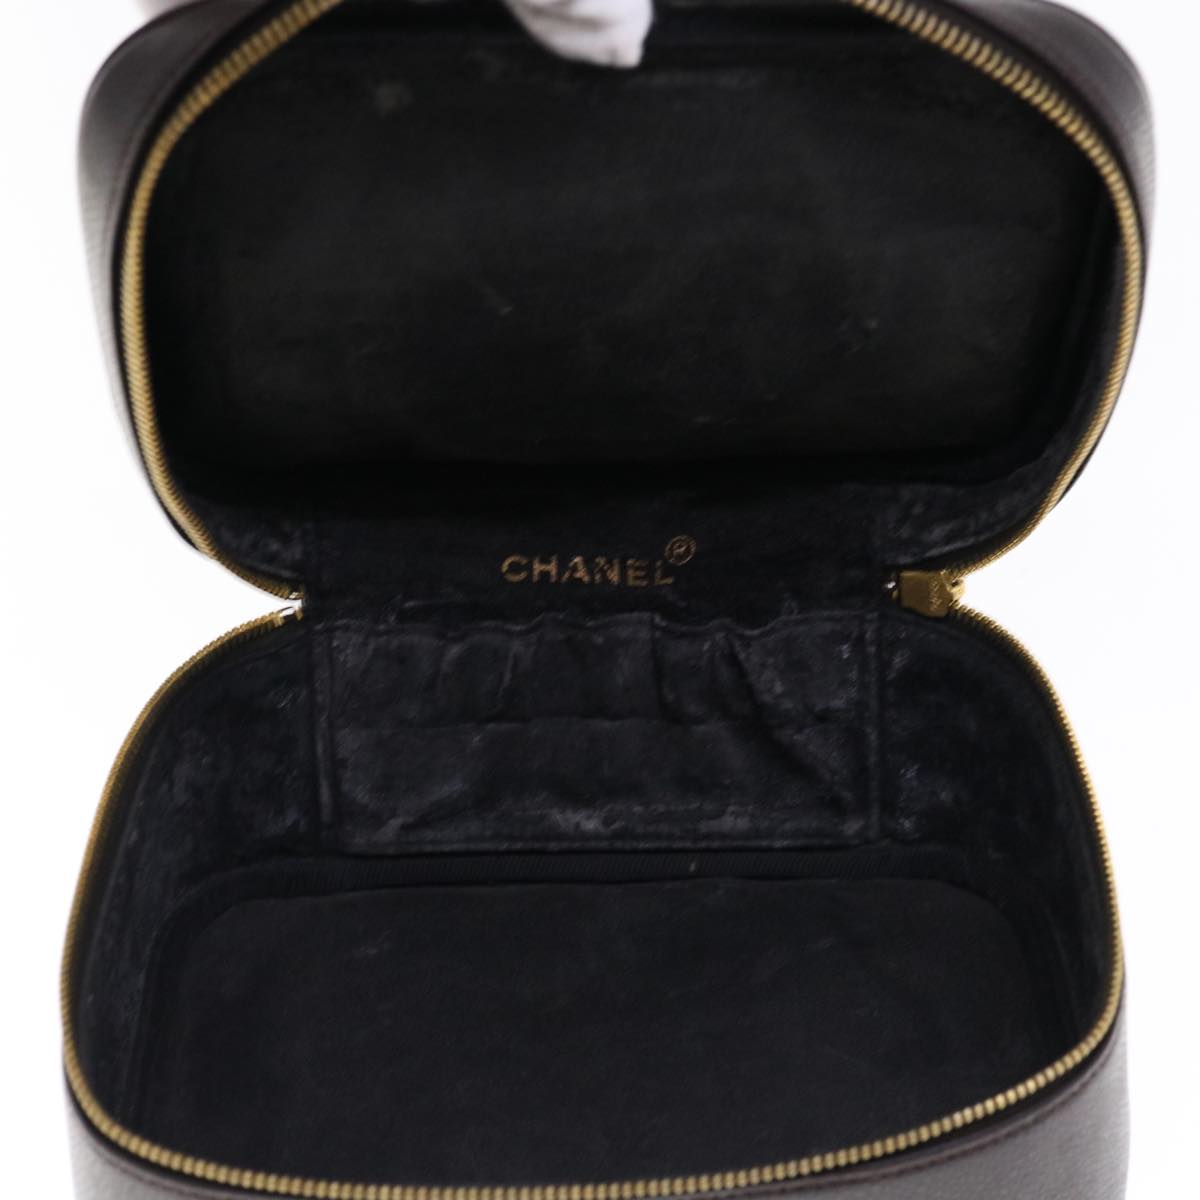 CHANEL Vanity Cosmetic Pouch Caviar Skin Brown CC Auth 64723